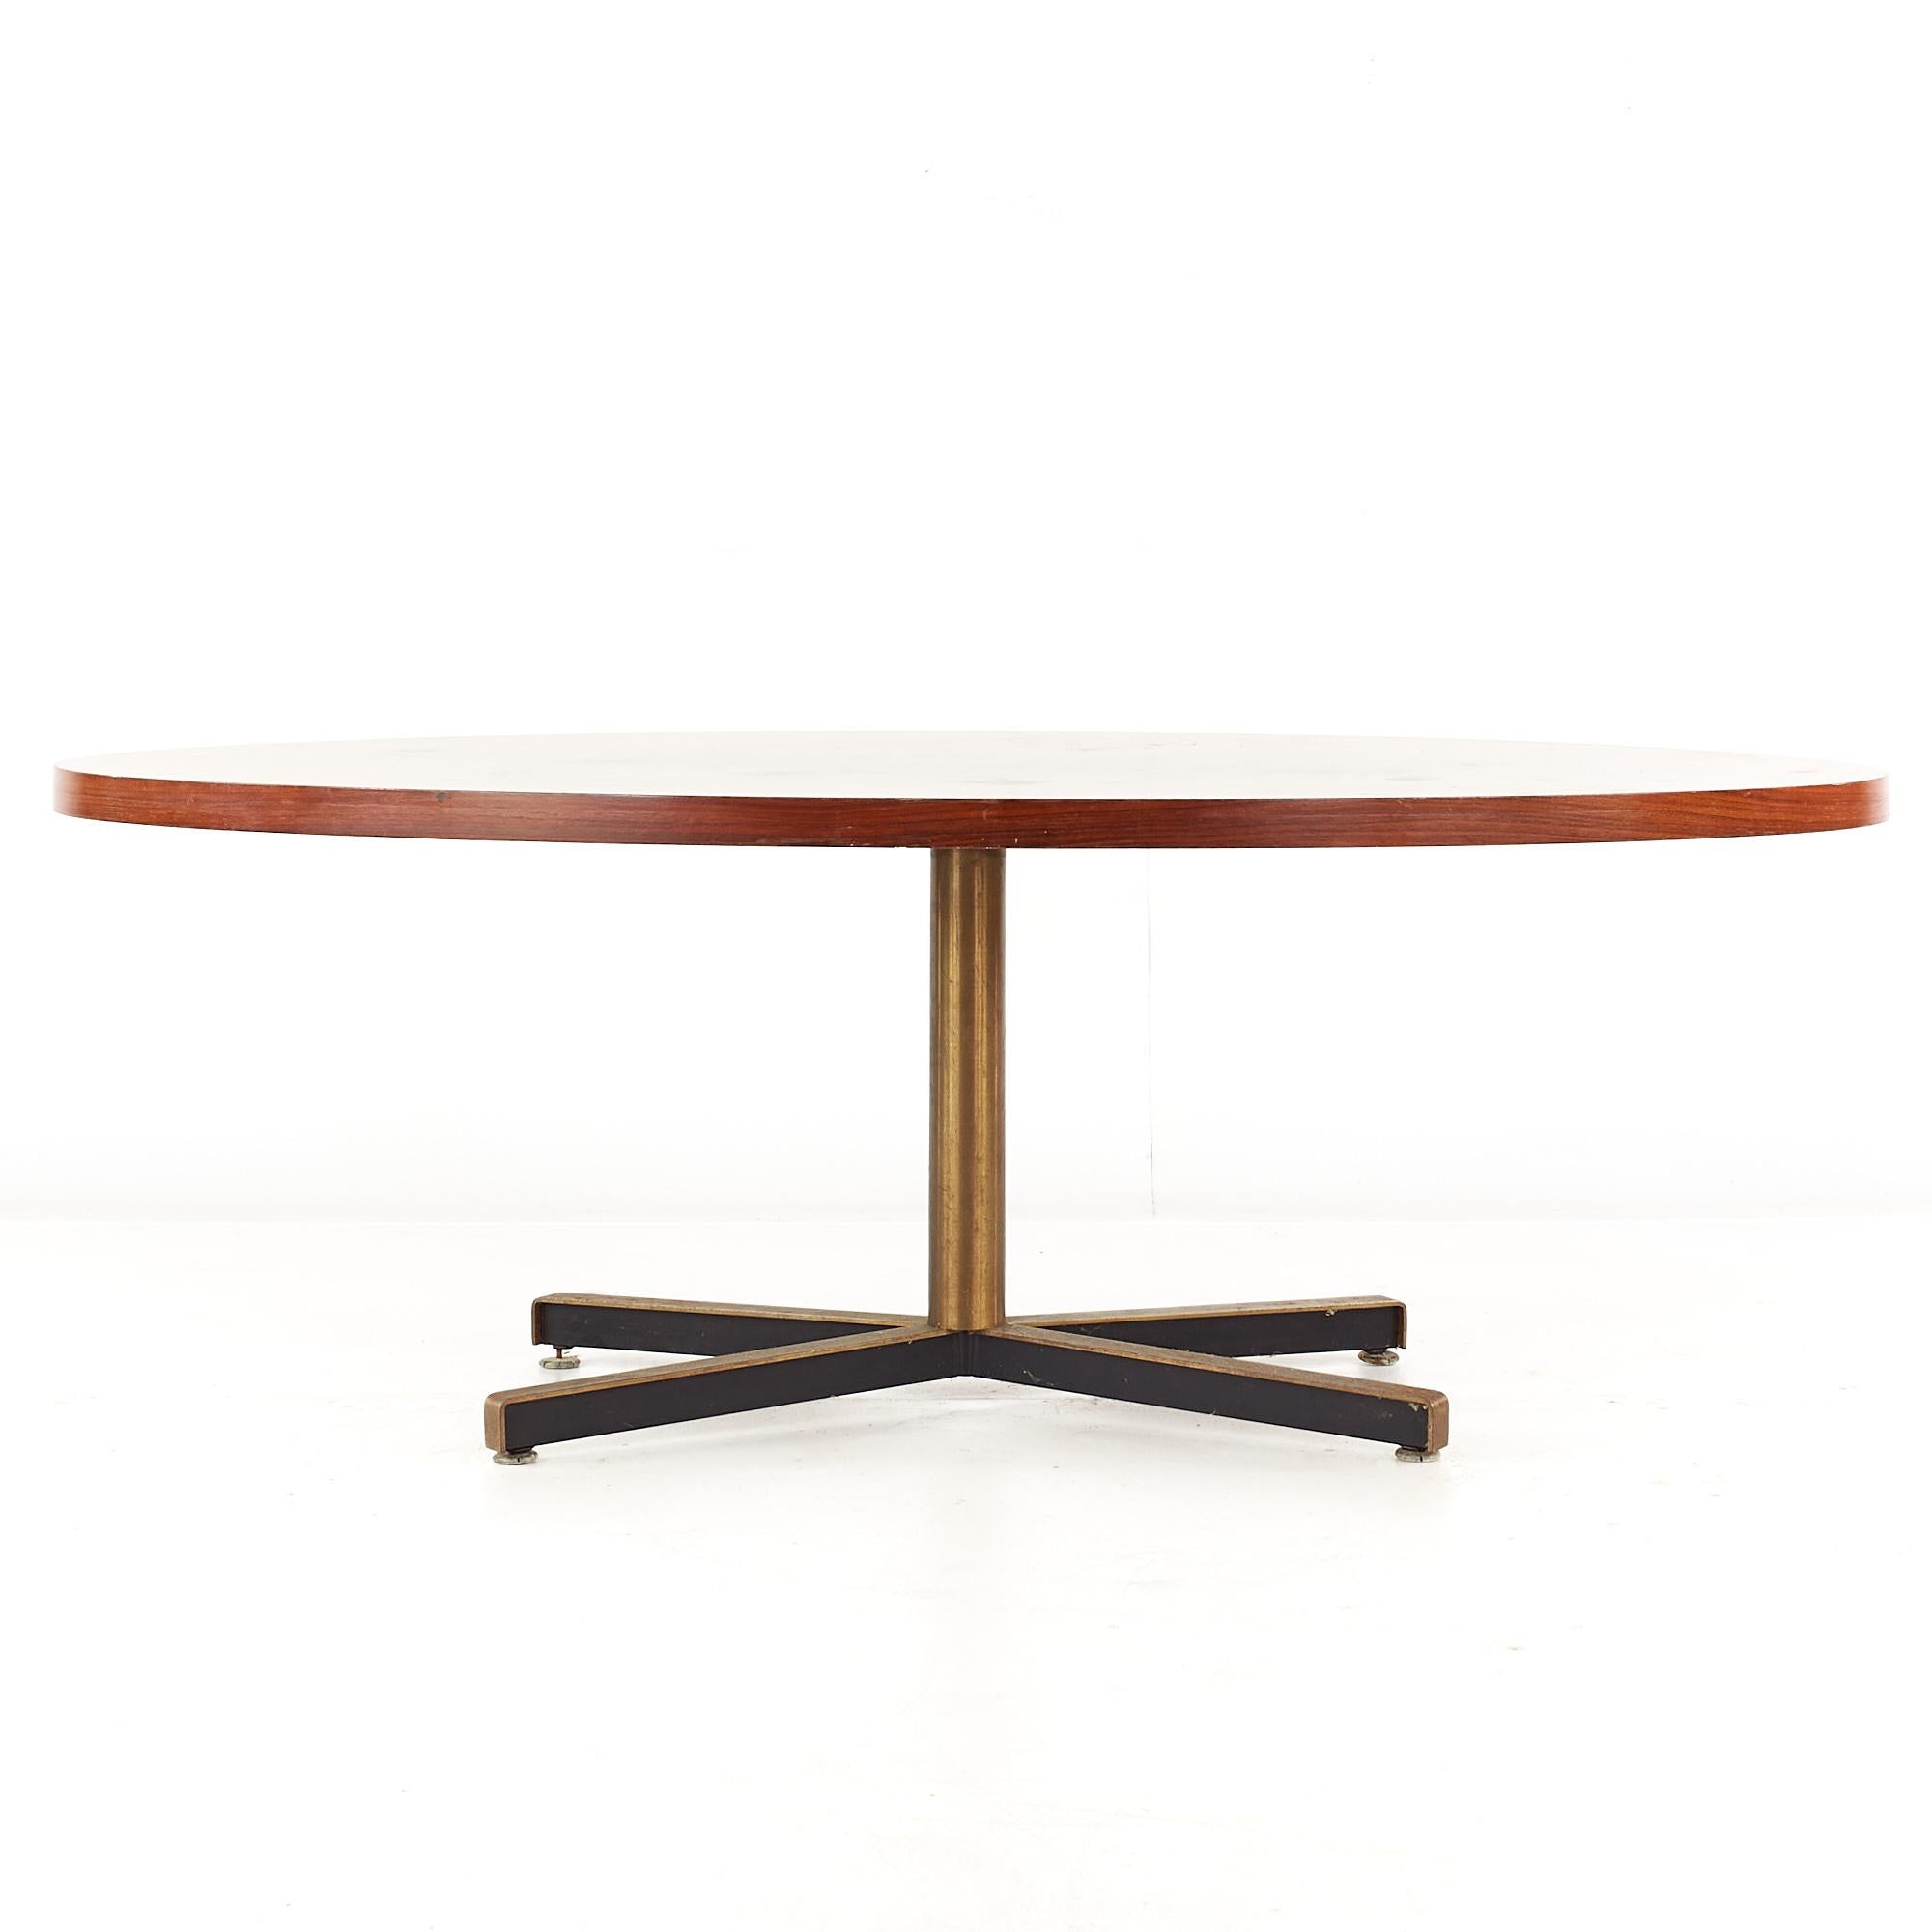 Florence Knoll Style Mid Century rosewood and brass dining table.

This dining table measures: 84 wide x 42 deep x 28.5 high, with a chair clearance of 26.25 inches.

All pieces of furniture can be had in what we call restored vintage condition.